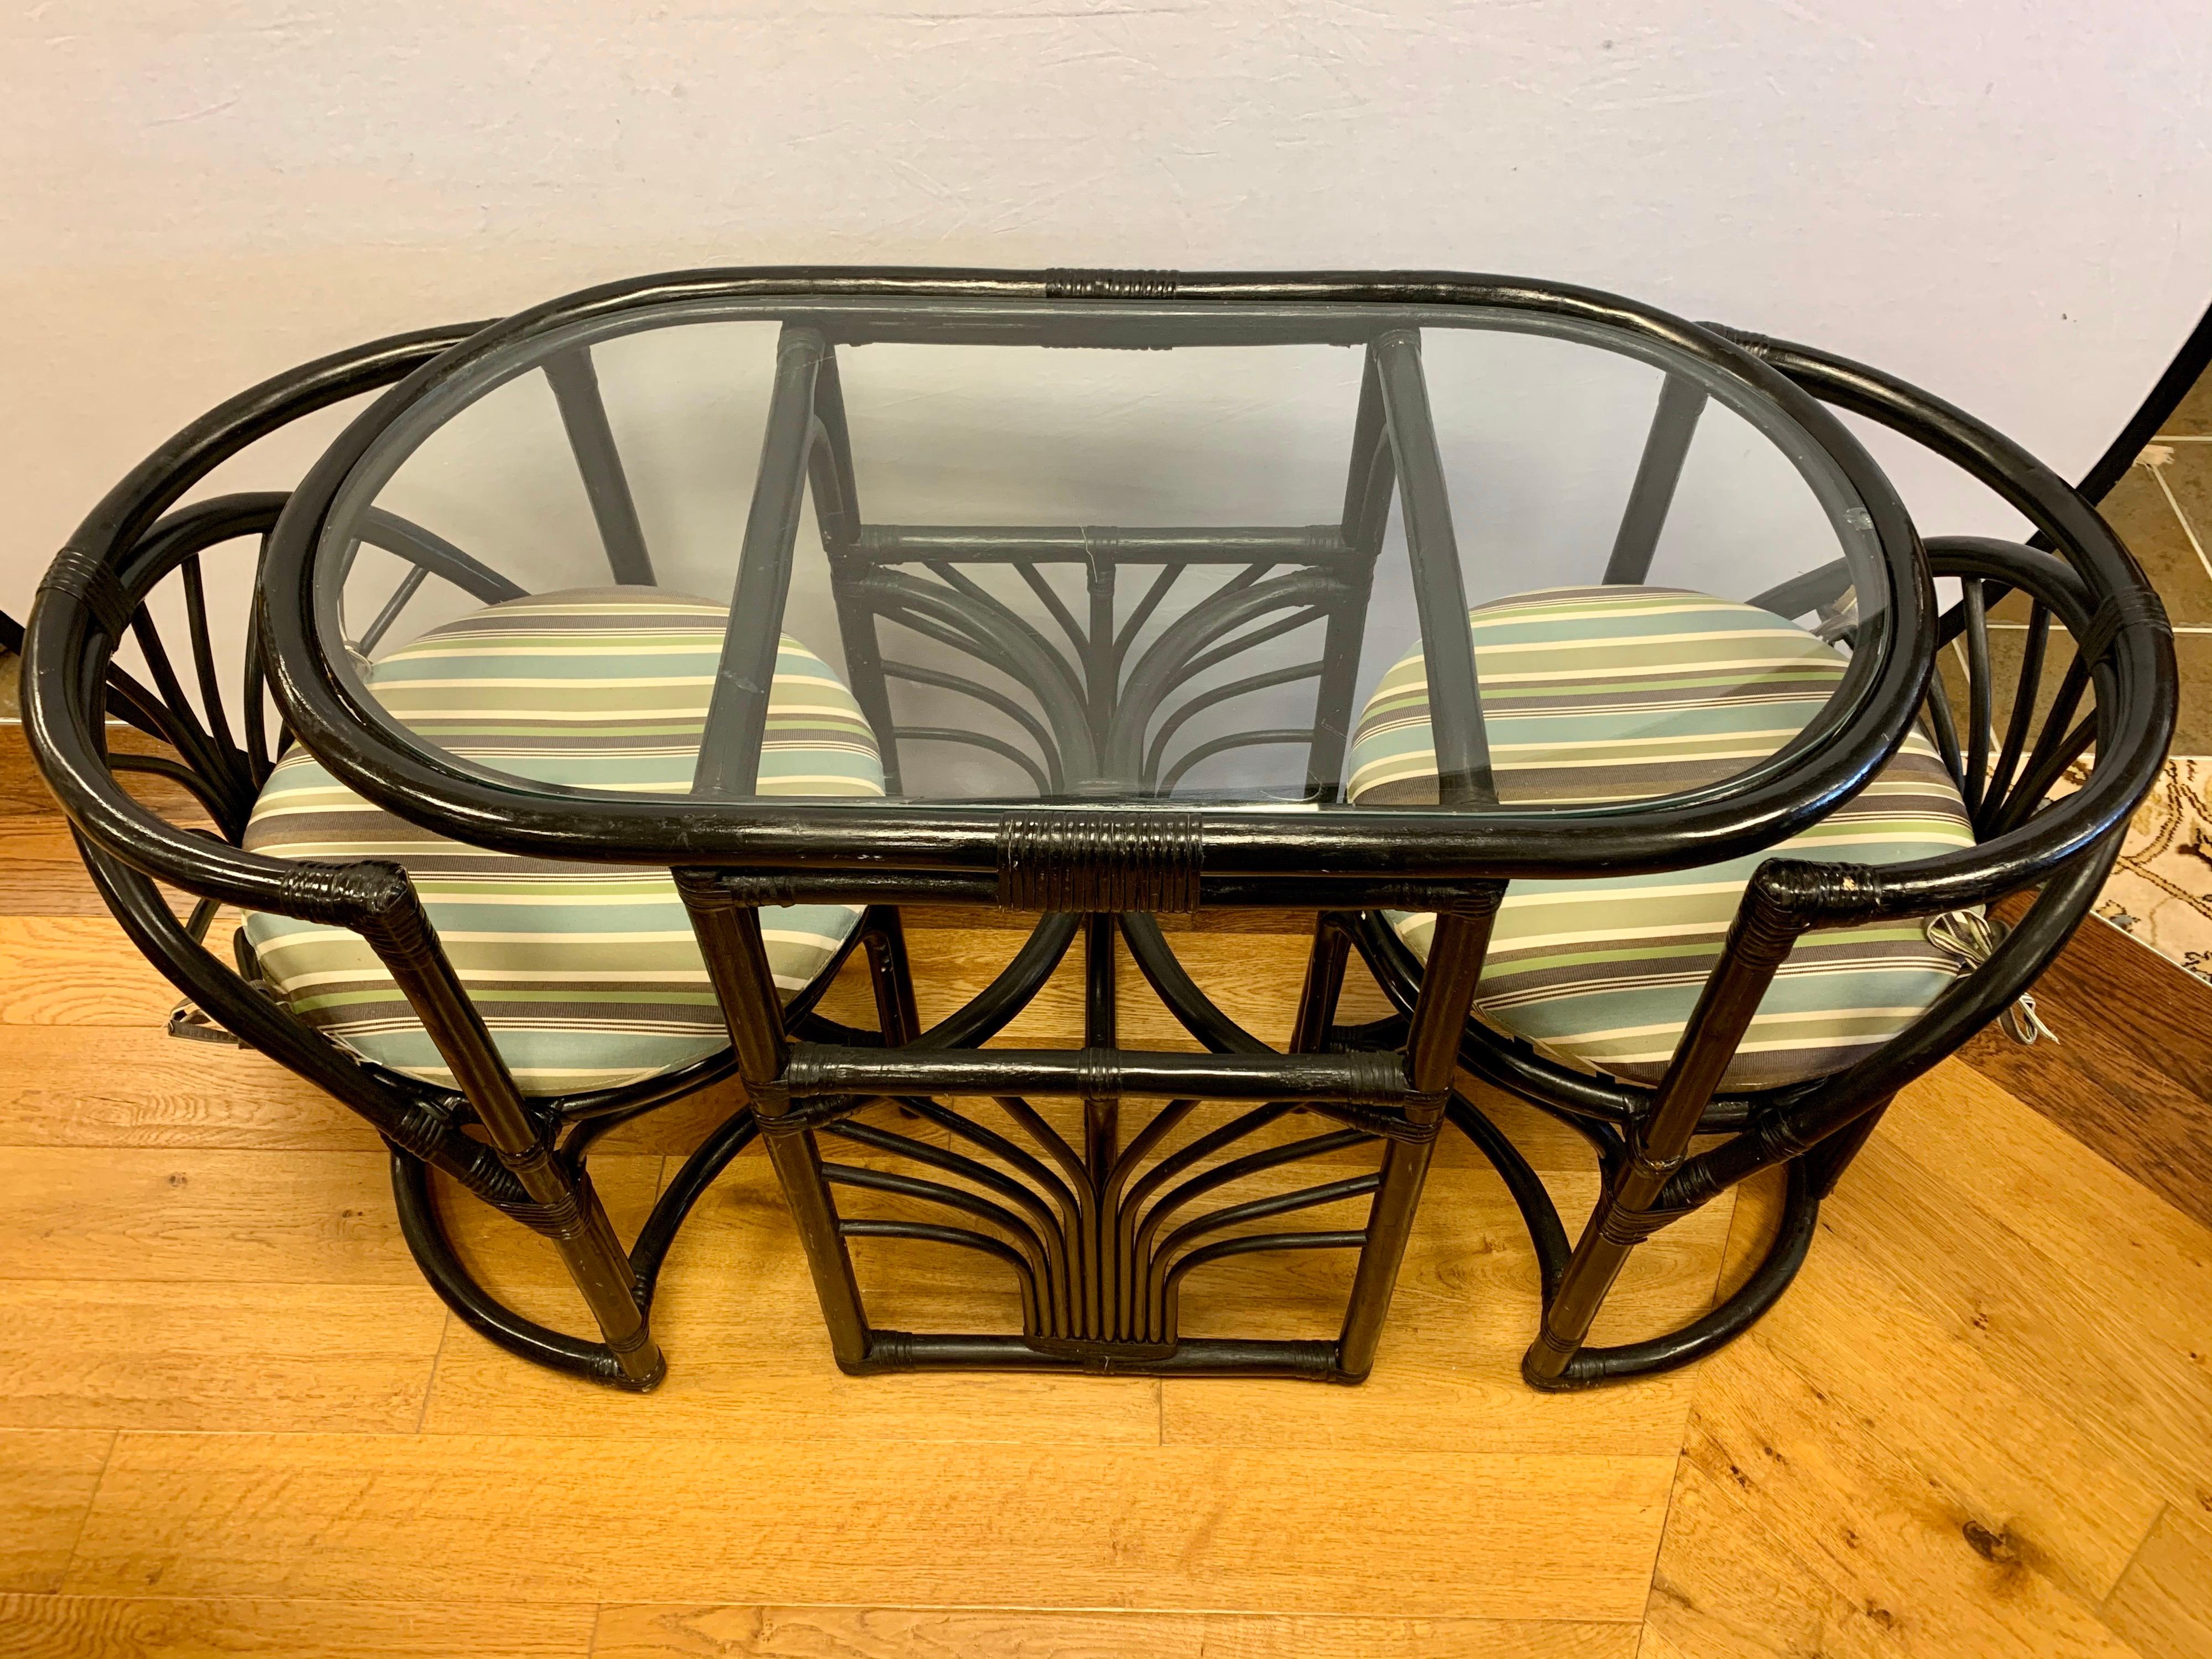 Rare three piece Paul Frankl style oval bistro set. Includes an oval rattan/bamboo table with glass top and two curved chairs that nest inside and then pull out. There is a separate seat cushion on each chair. The set was hand painted black back in